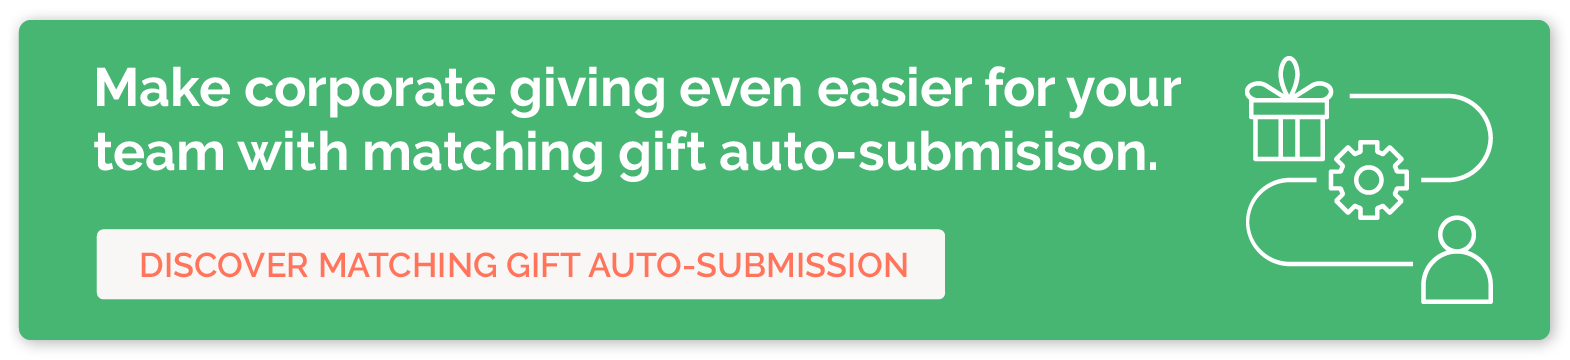 Make corporate giving even easier for your team with matching gift auto-submission. Discover matching gift auto-submission.